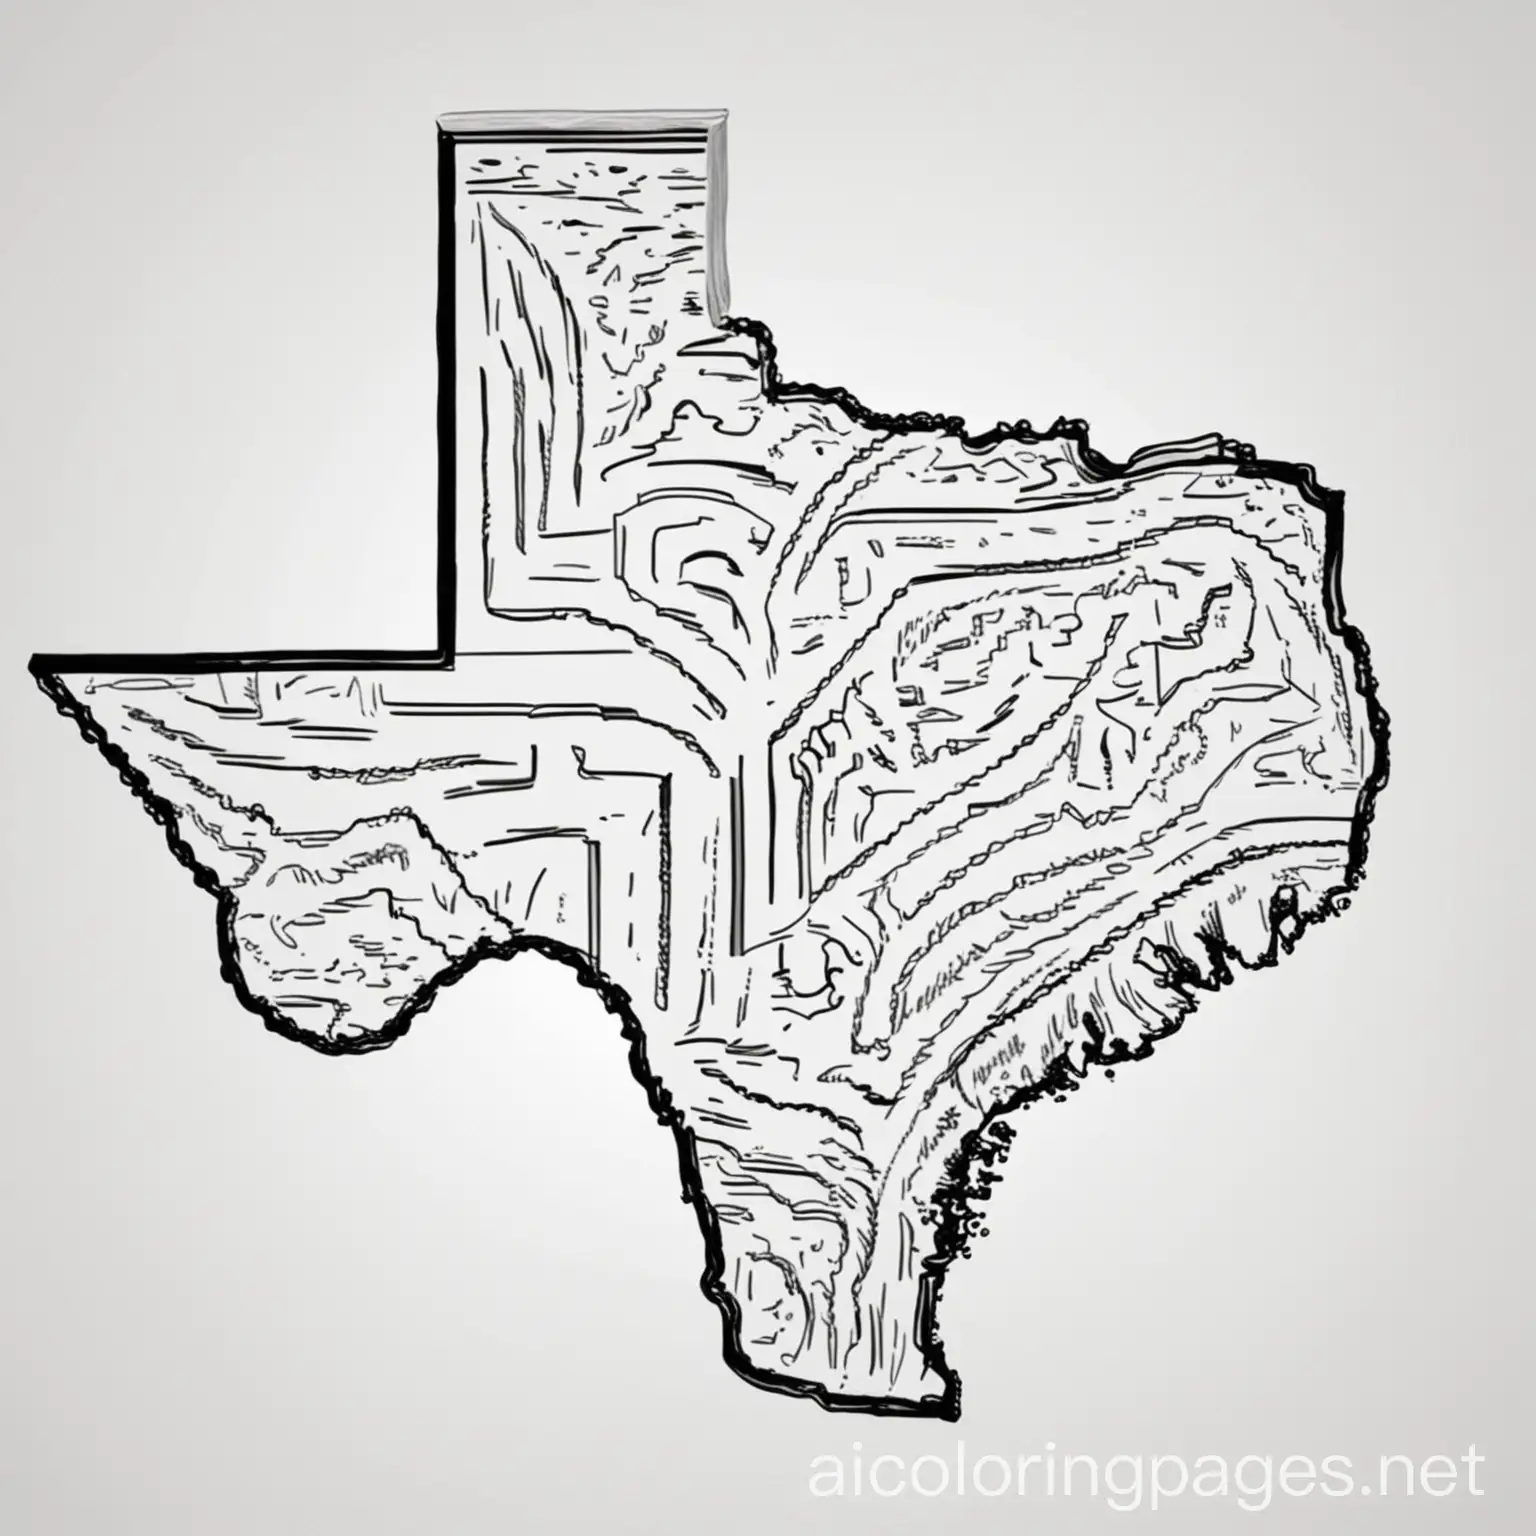 Texas-State-Coloring-Page-for-Kids-Simple-Black-and-White-Line-Art-Design